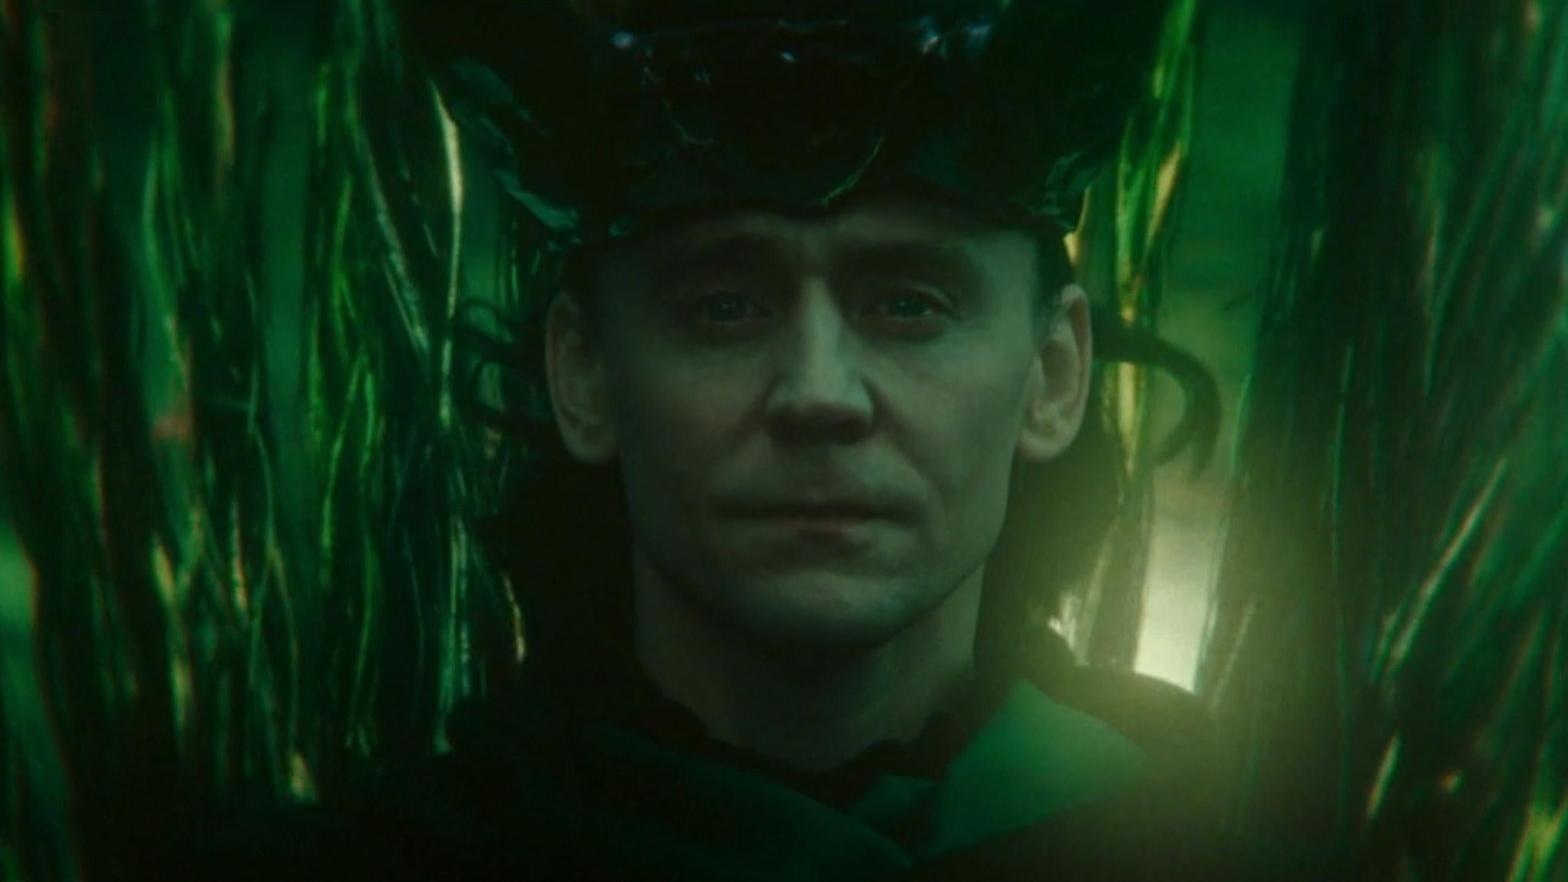 Loki Season 2: All the Glorious Facts We Learned in Its Making-of Documentary